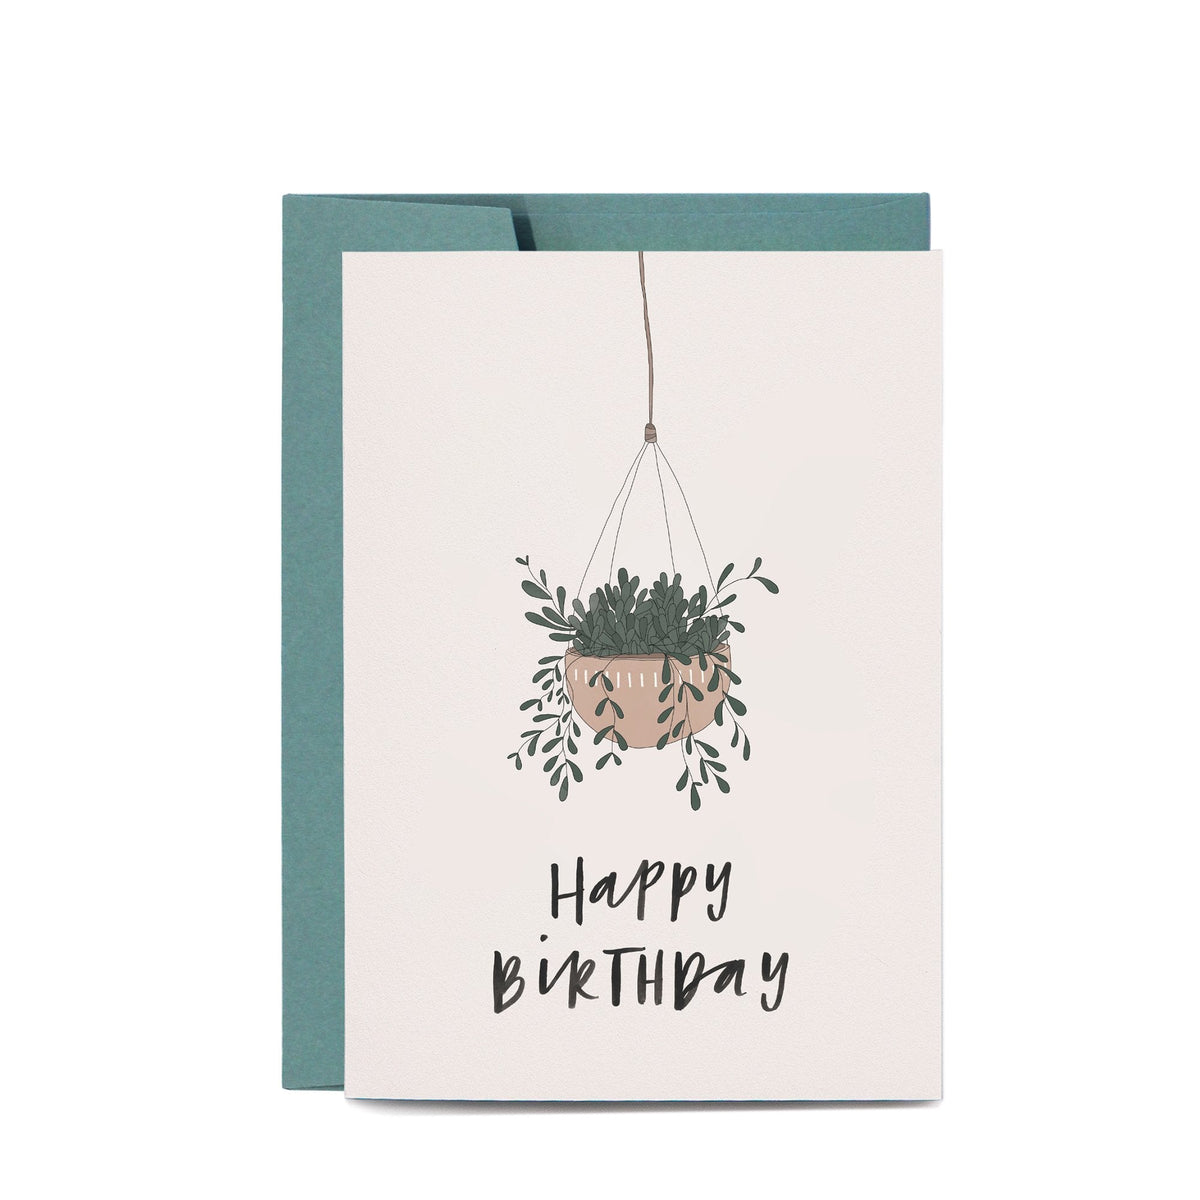 In the Daylight - Card - Birthday - Hanging Plant